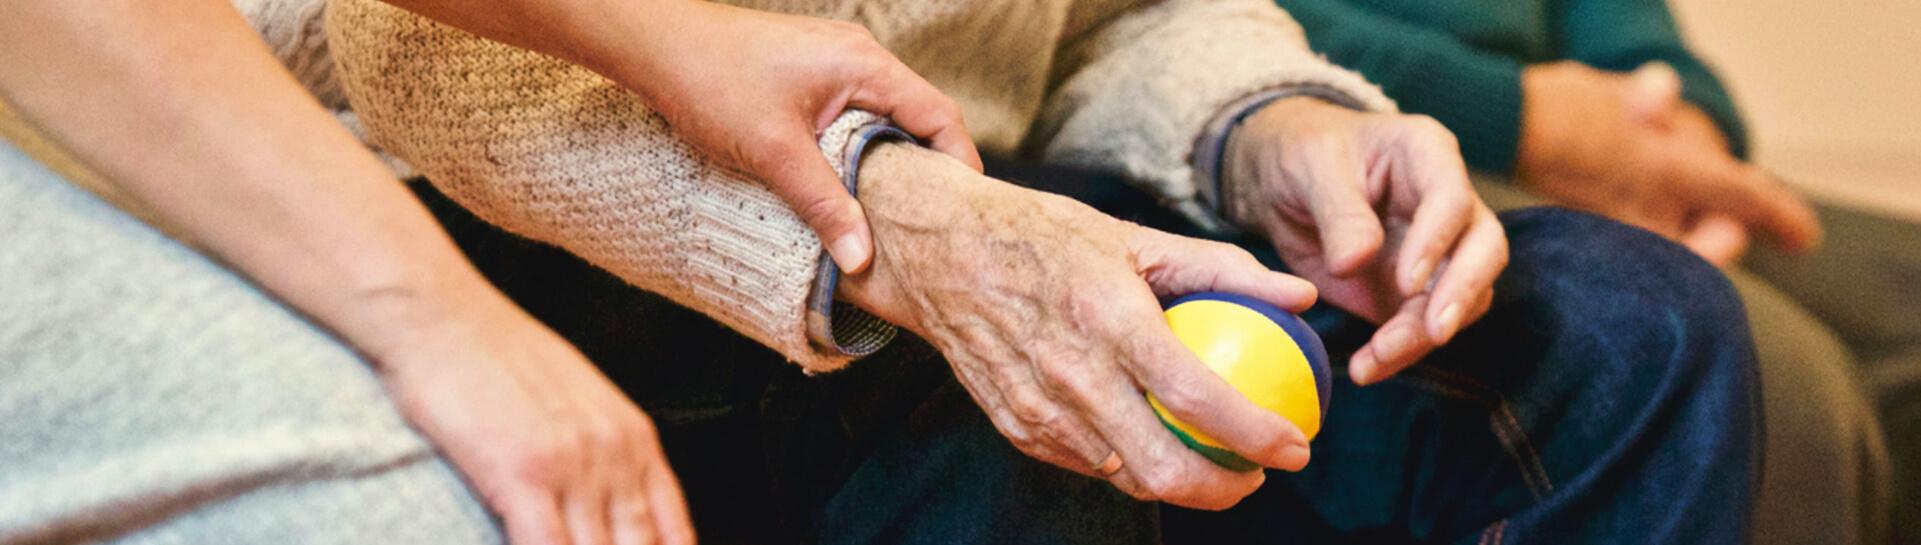 A person holding an elderly person's arm